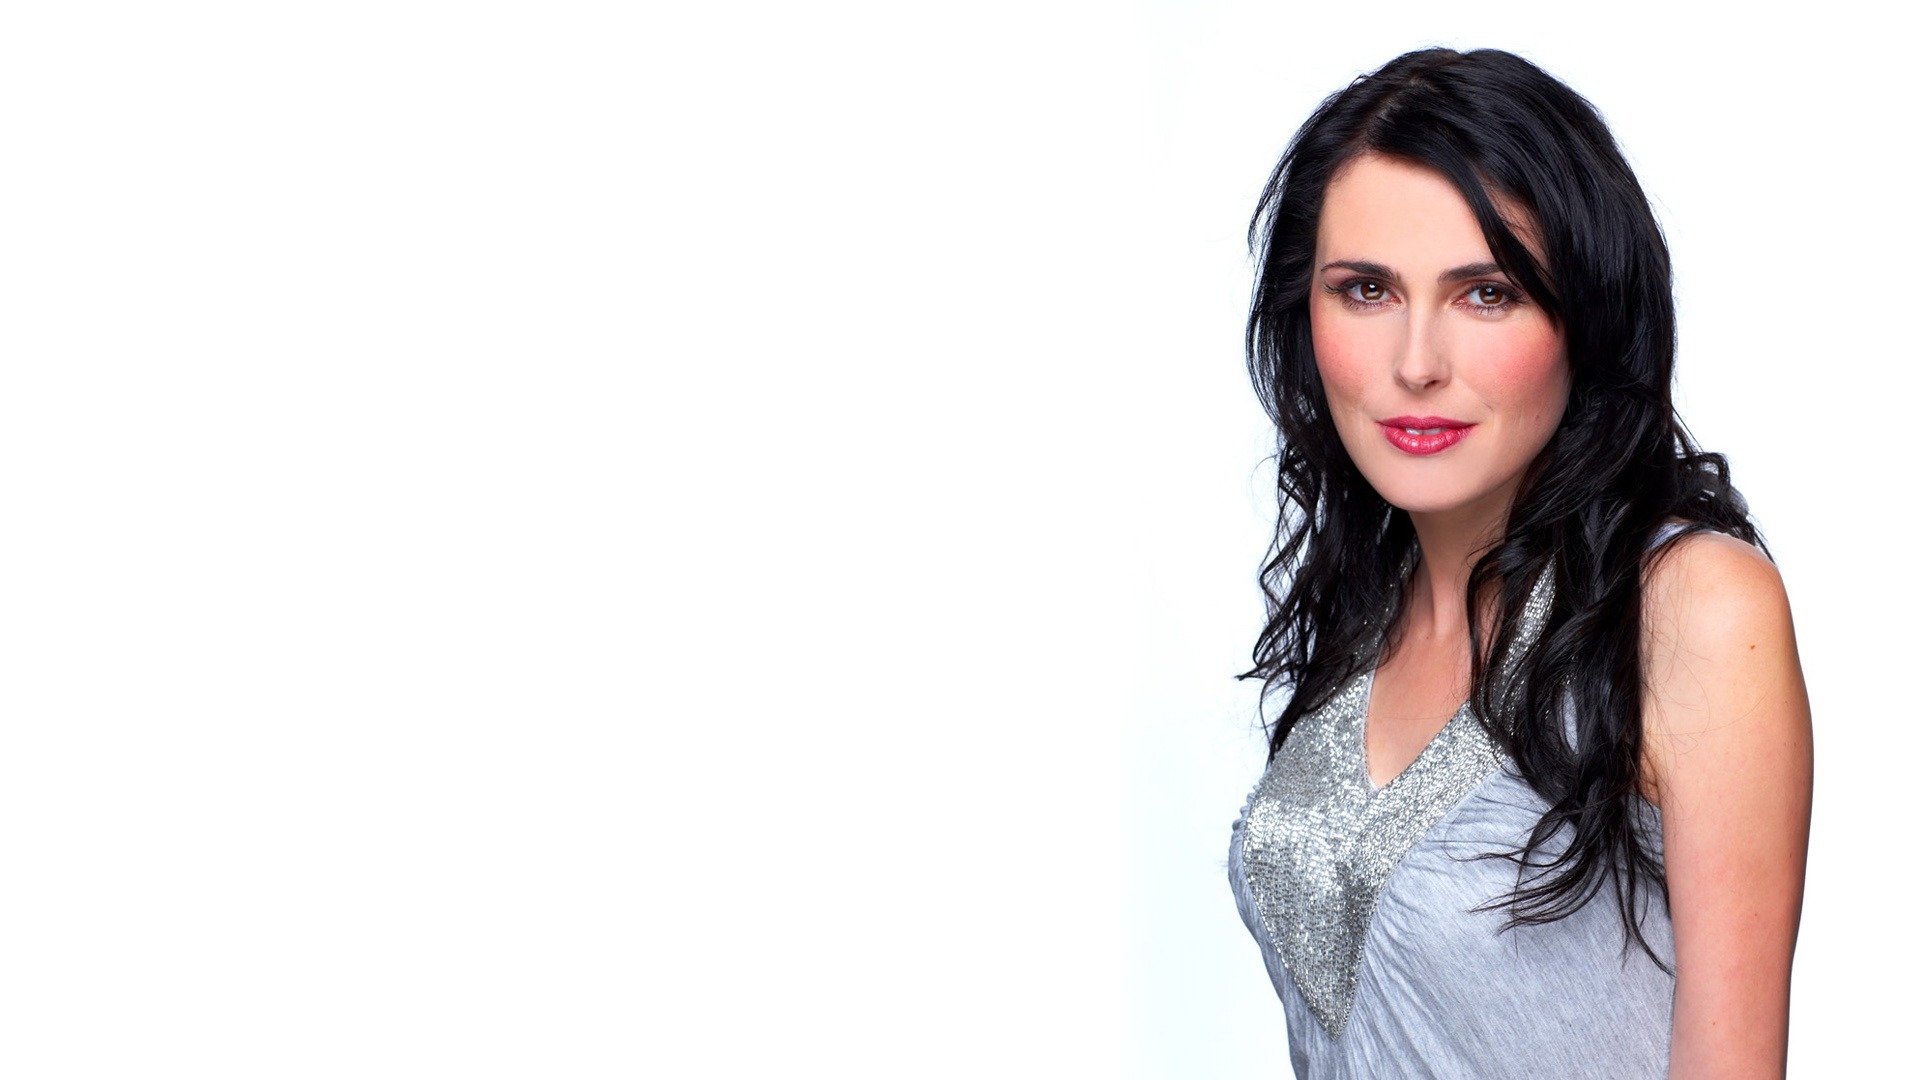 Sharon den Adel #007 - 1920x1080 Wallpapers Pictures Photos Images